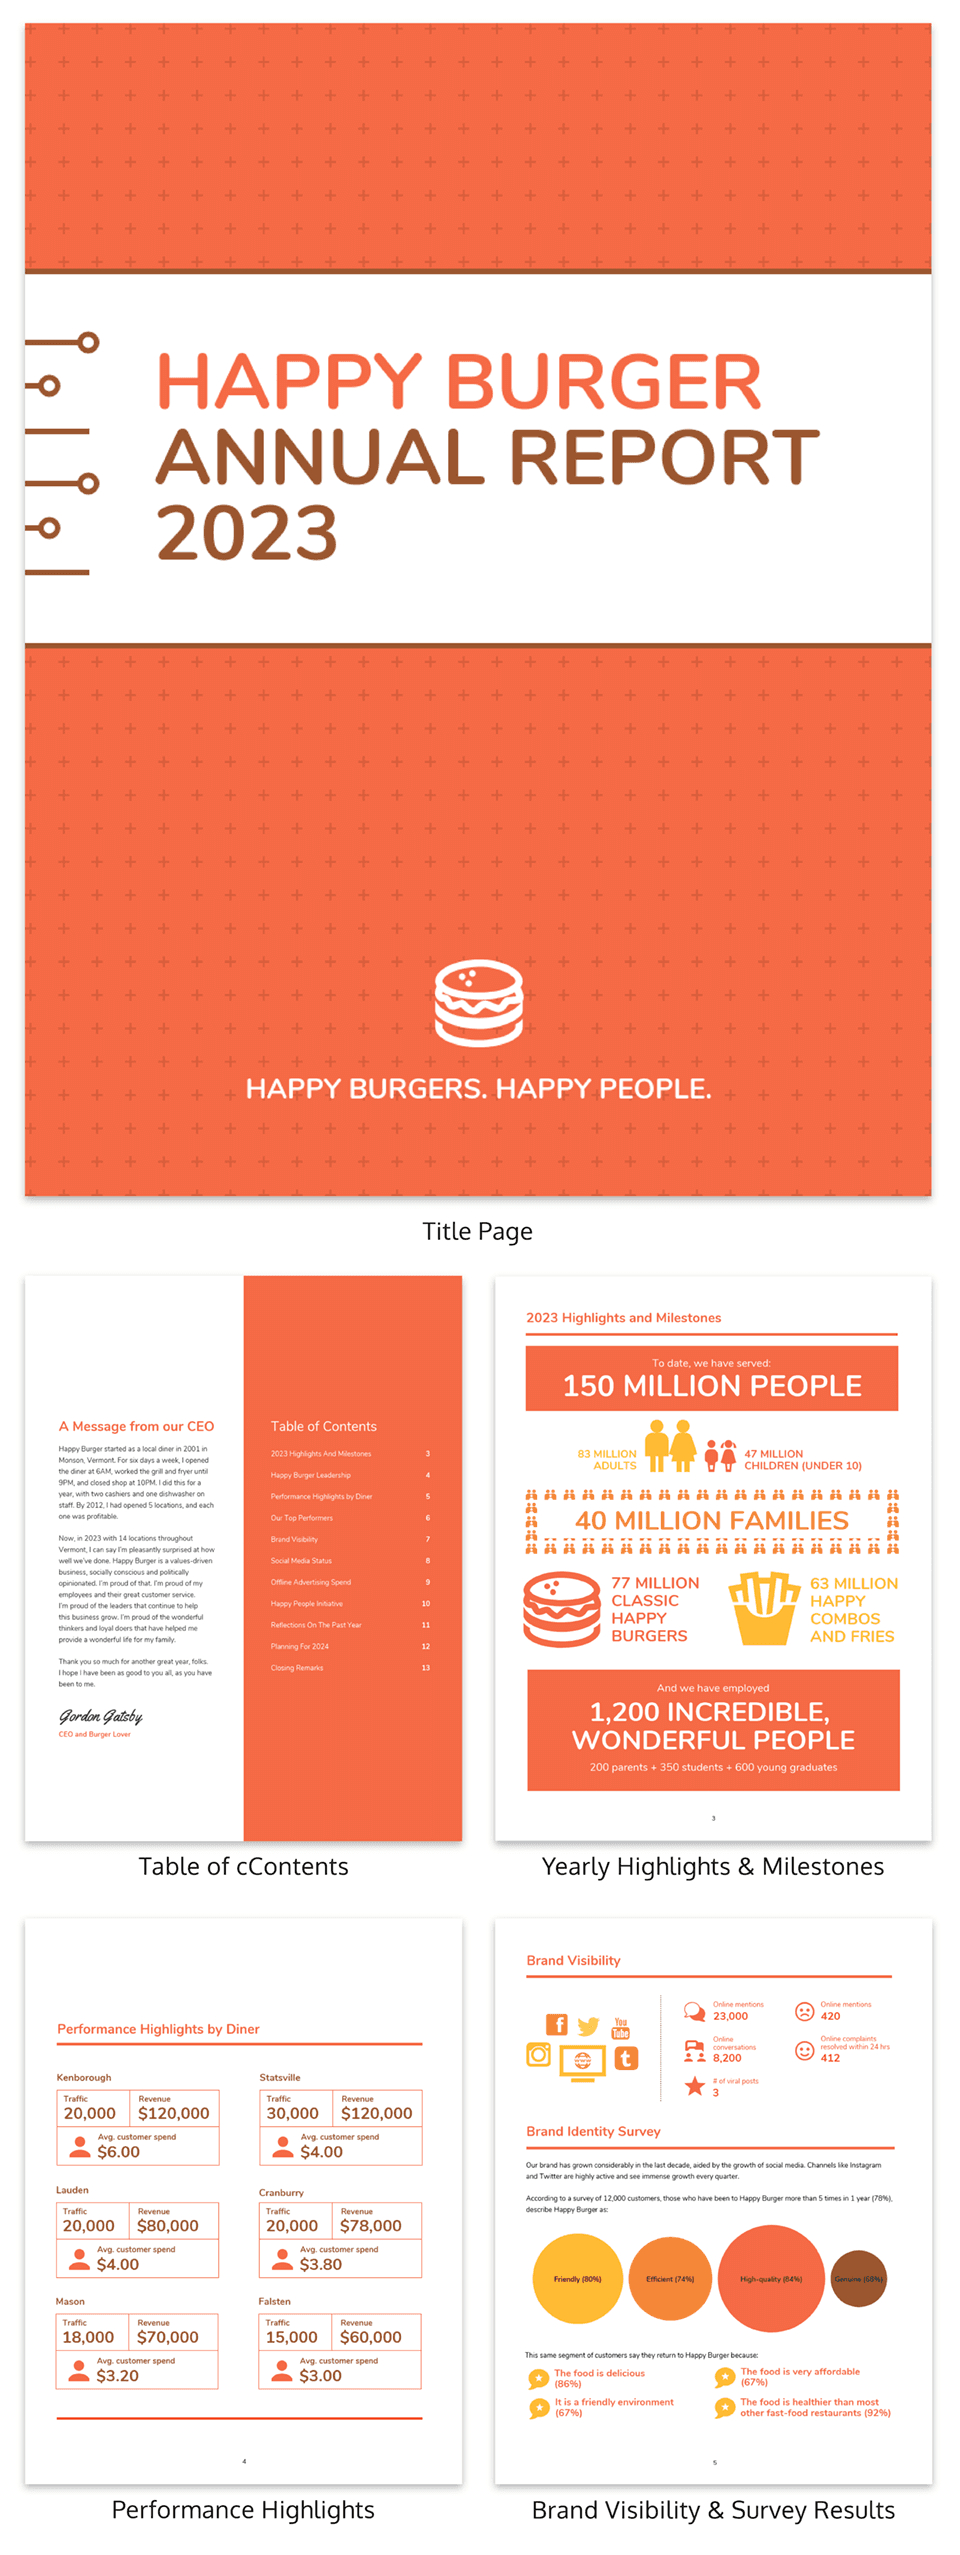 55+ Customizable Annual Report Design Templates, Examples & Tips Throughout Hr Annual Report Template